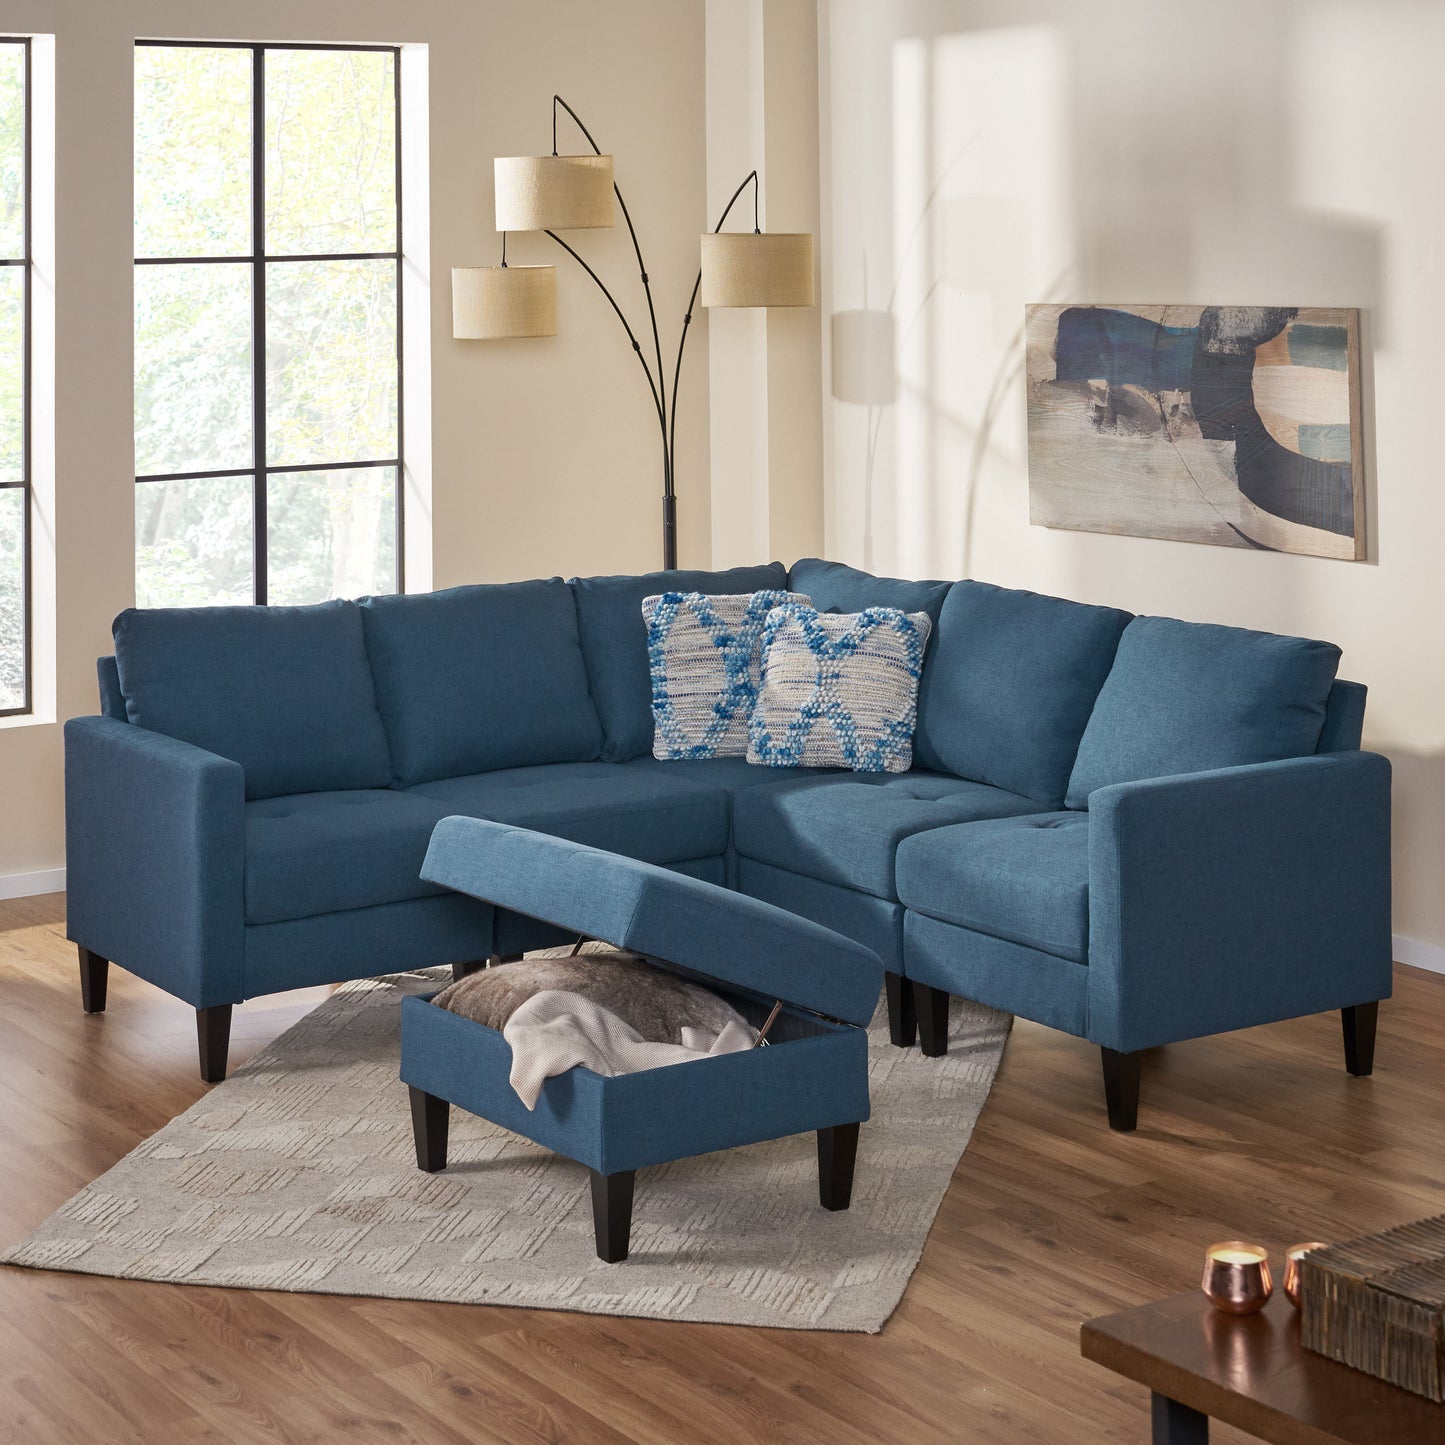 Bridger Fabric Sectional Couch with Storage Ottoman